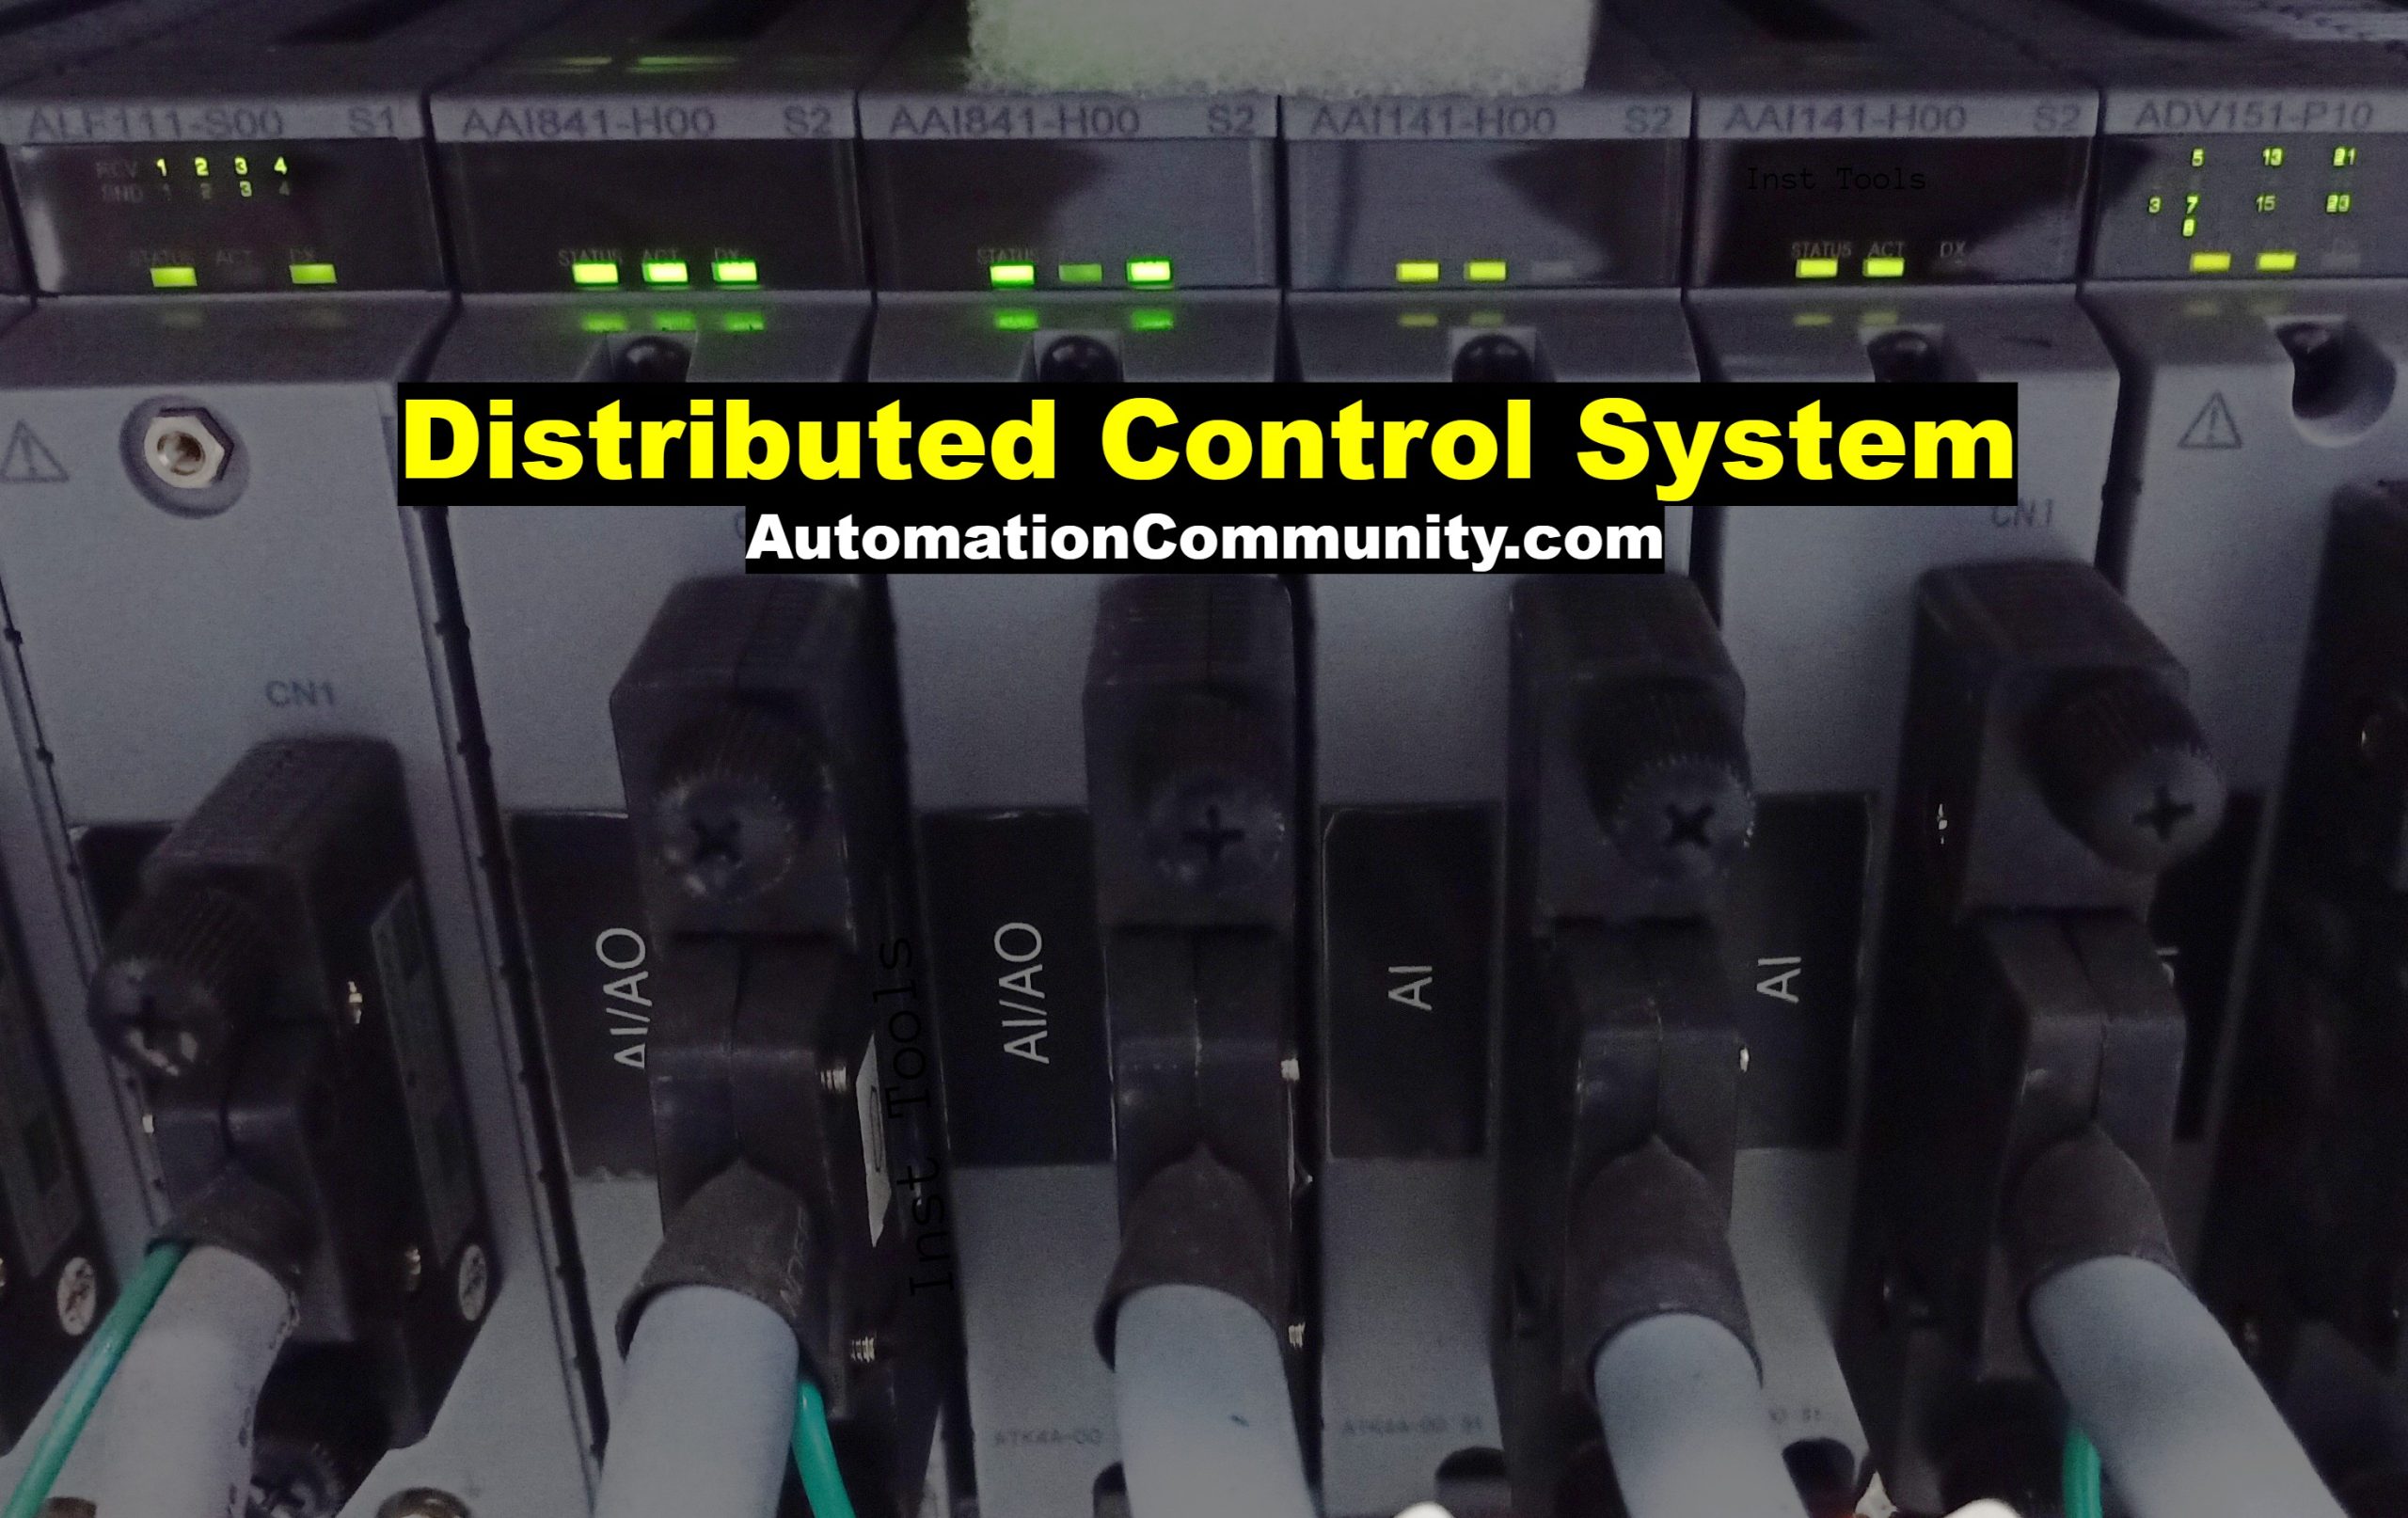 50 Distributed Control System Questions and Answers (DCS)